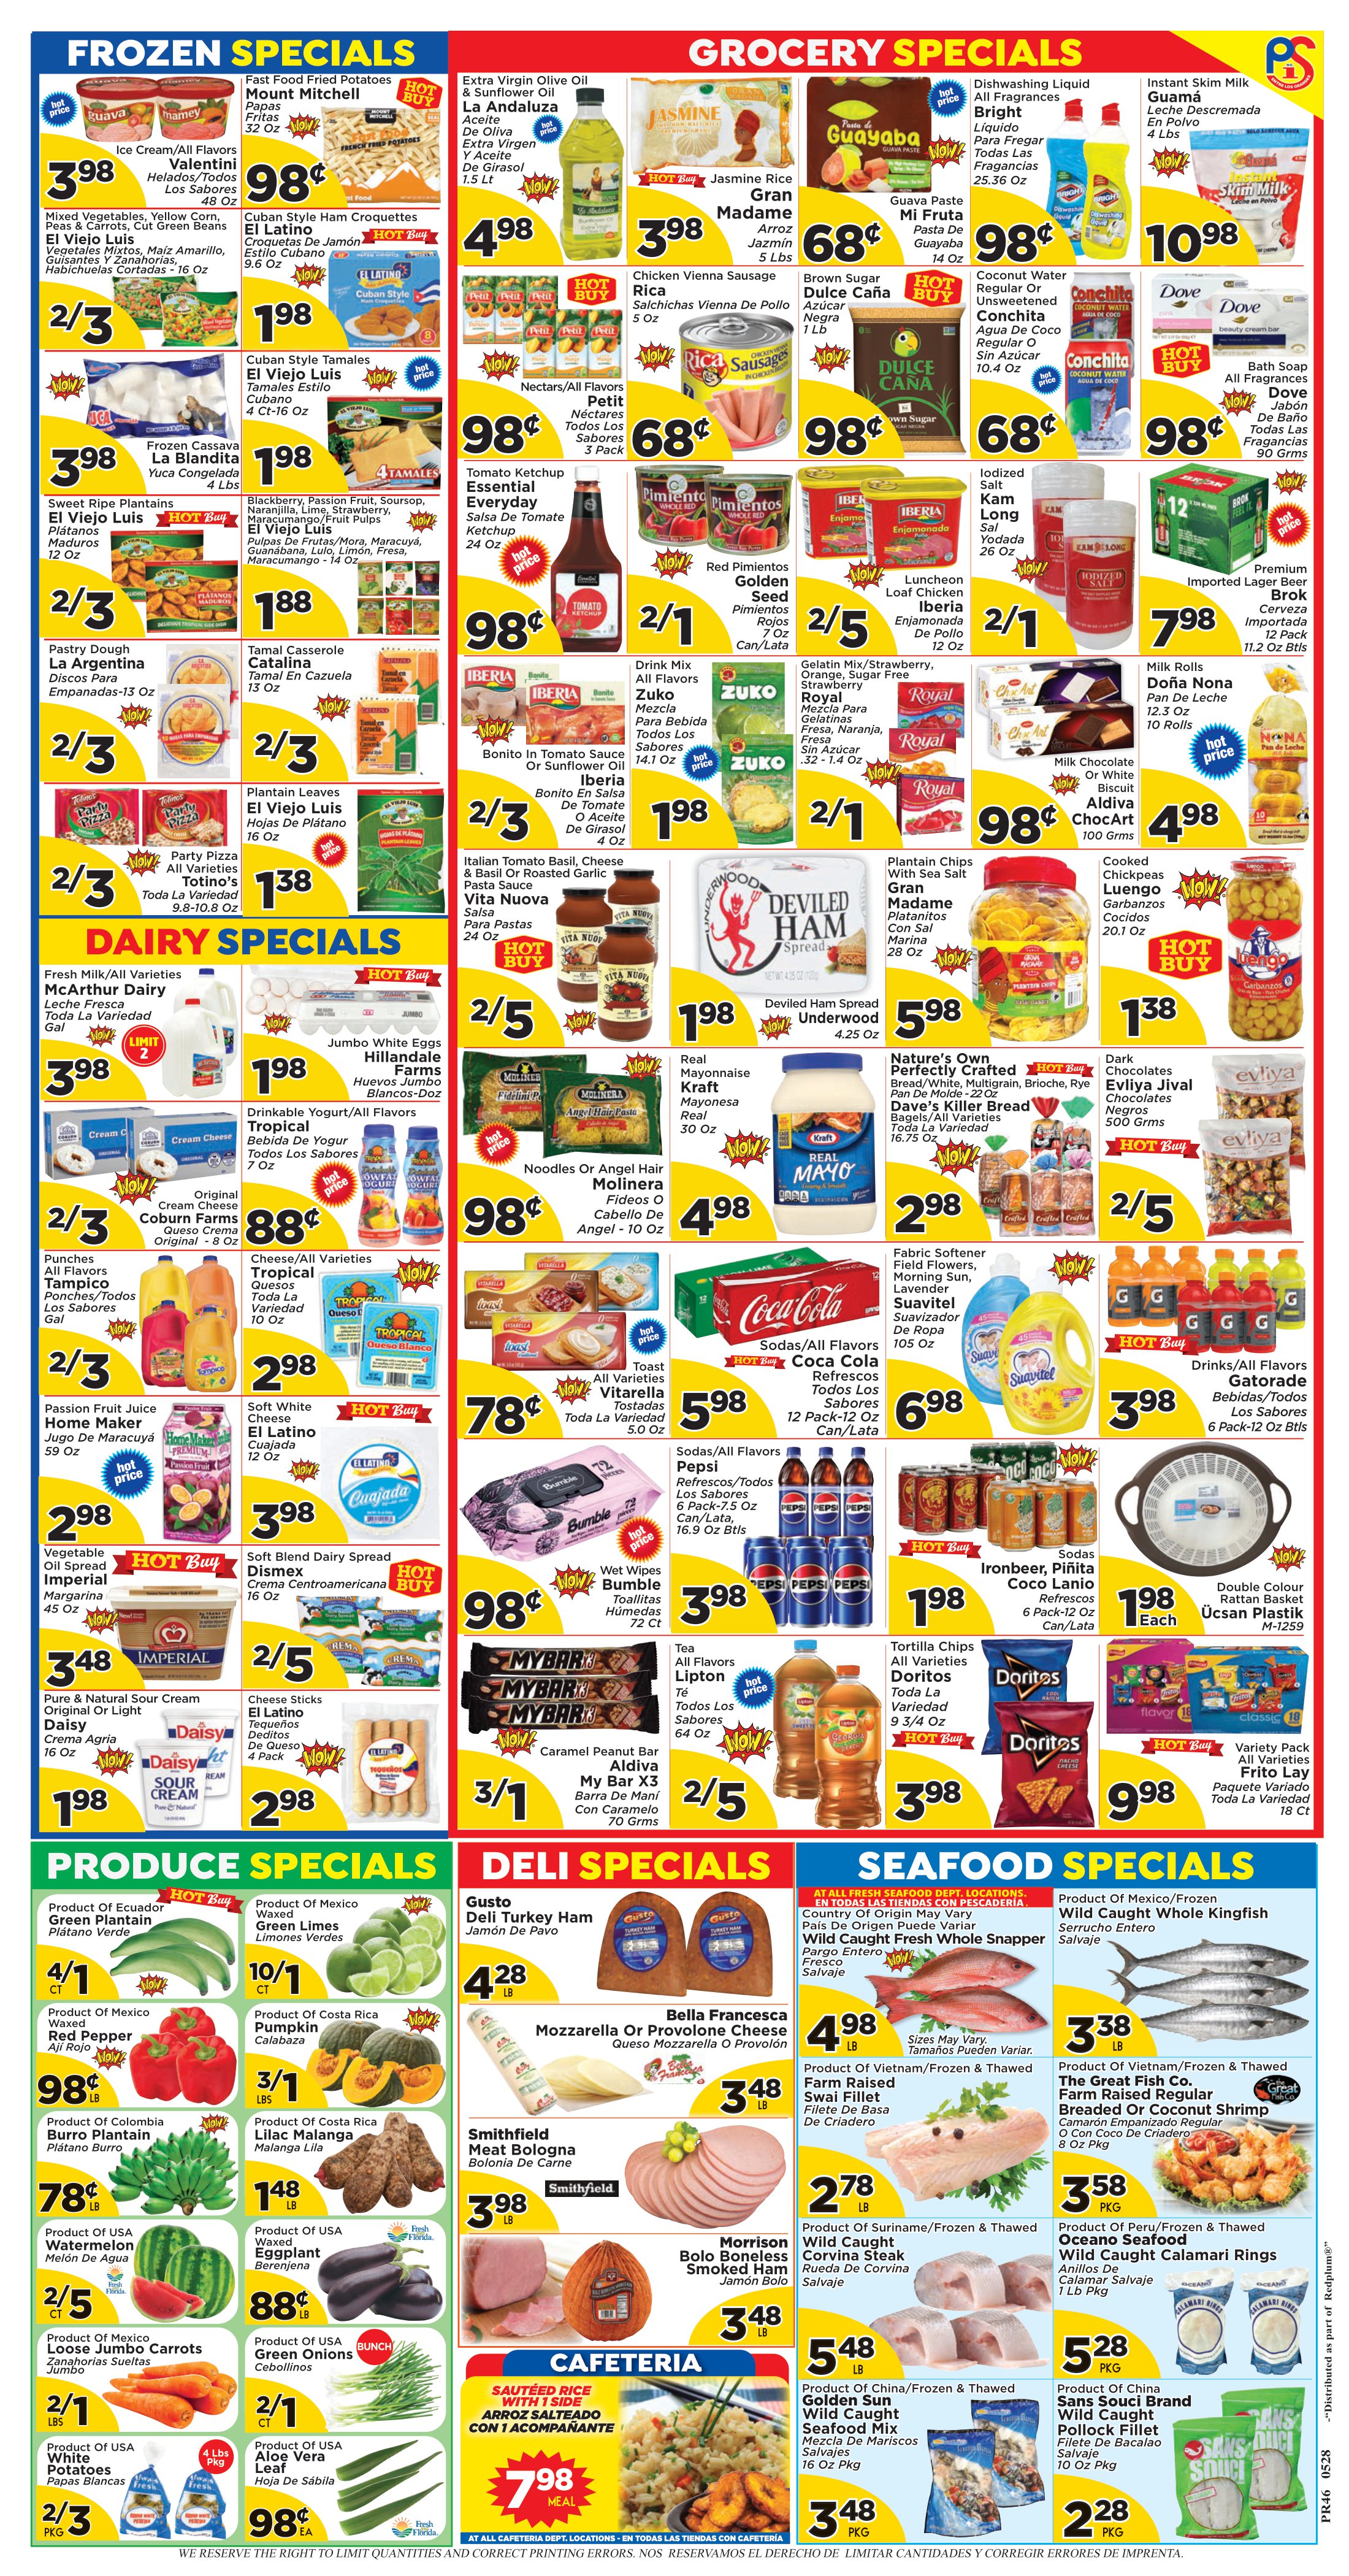 Presidente Supermarket - Weekly Promo for Stores 46 Page 2